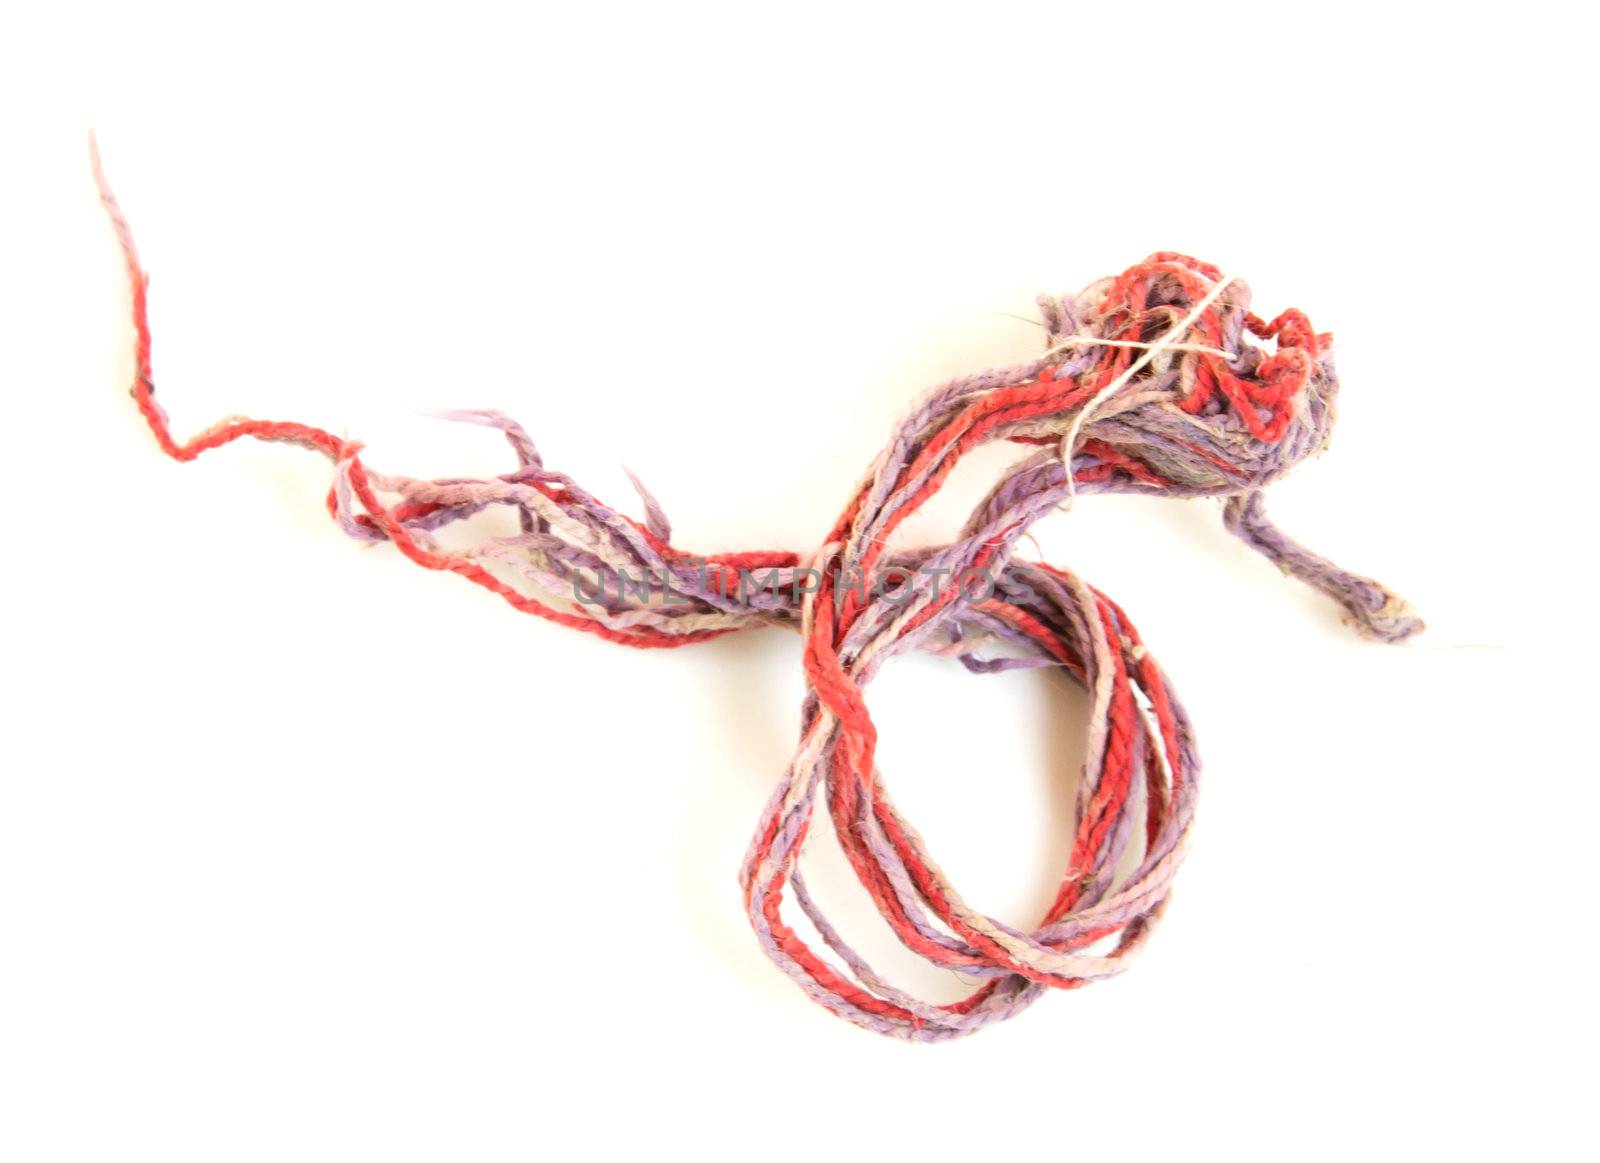 multi-colored rope on a white background by schankz